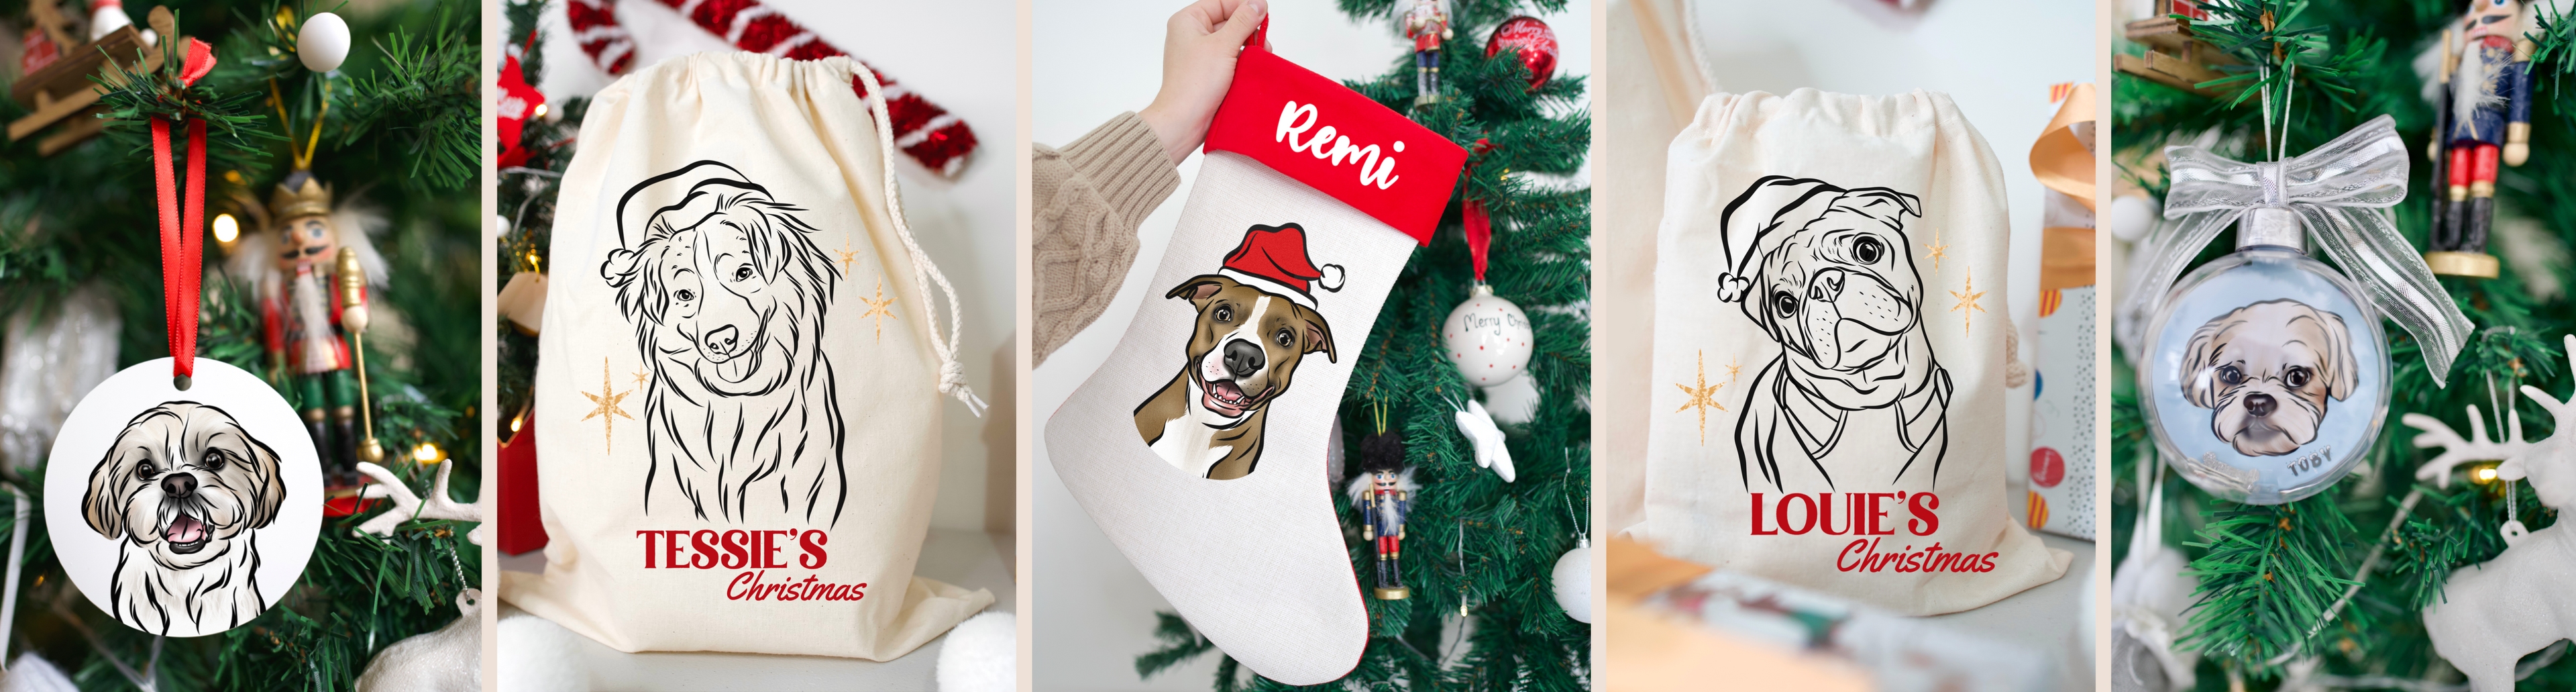 image personalized festive gifts